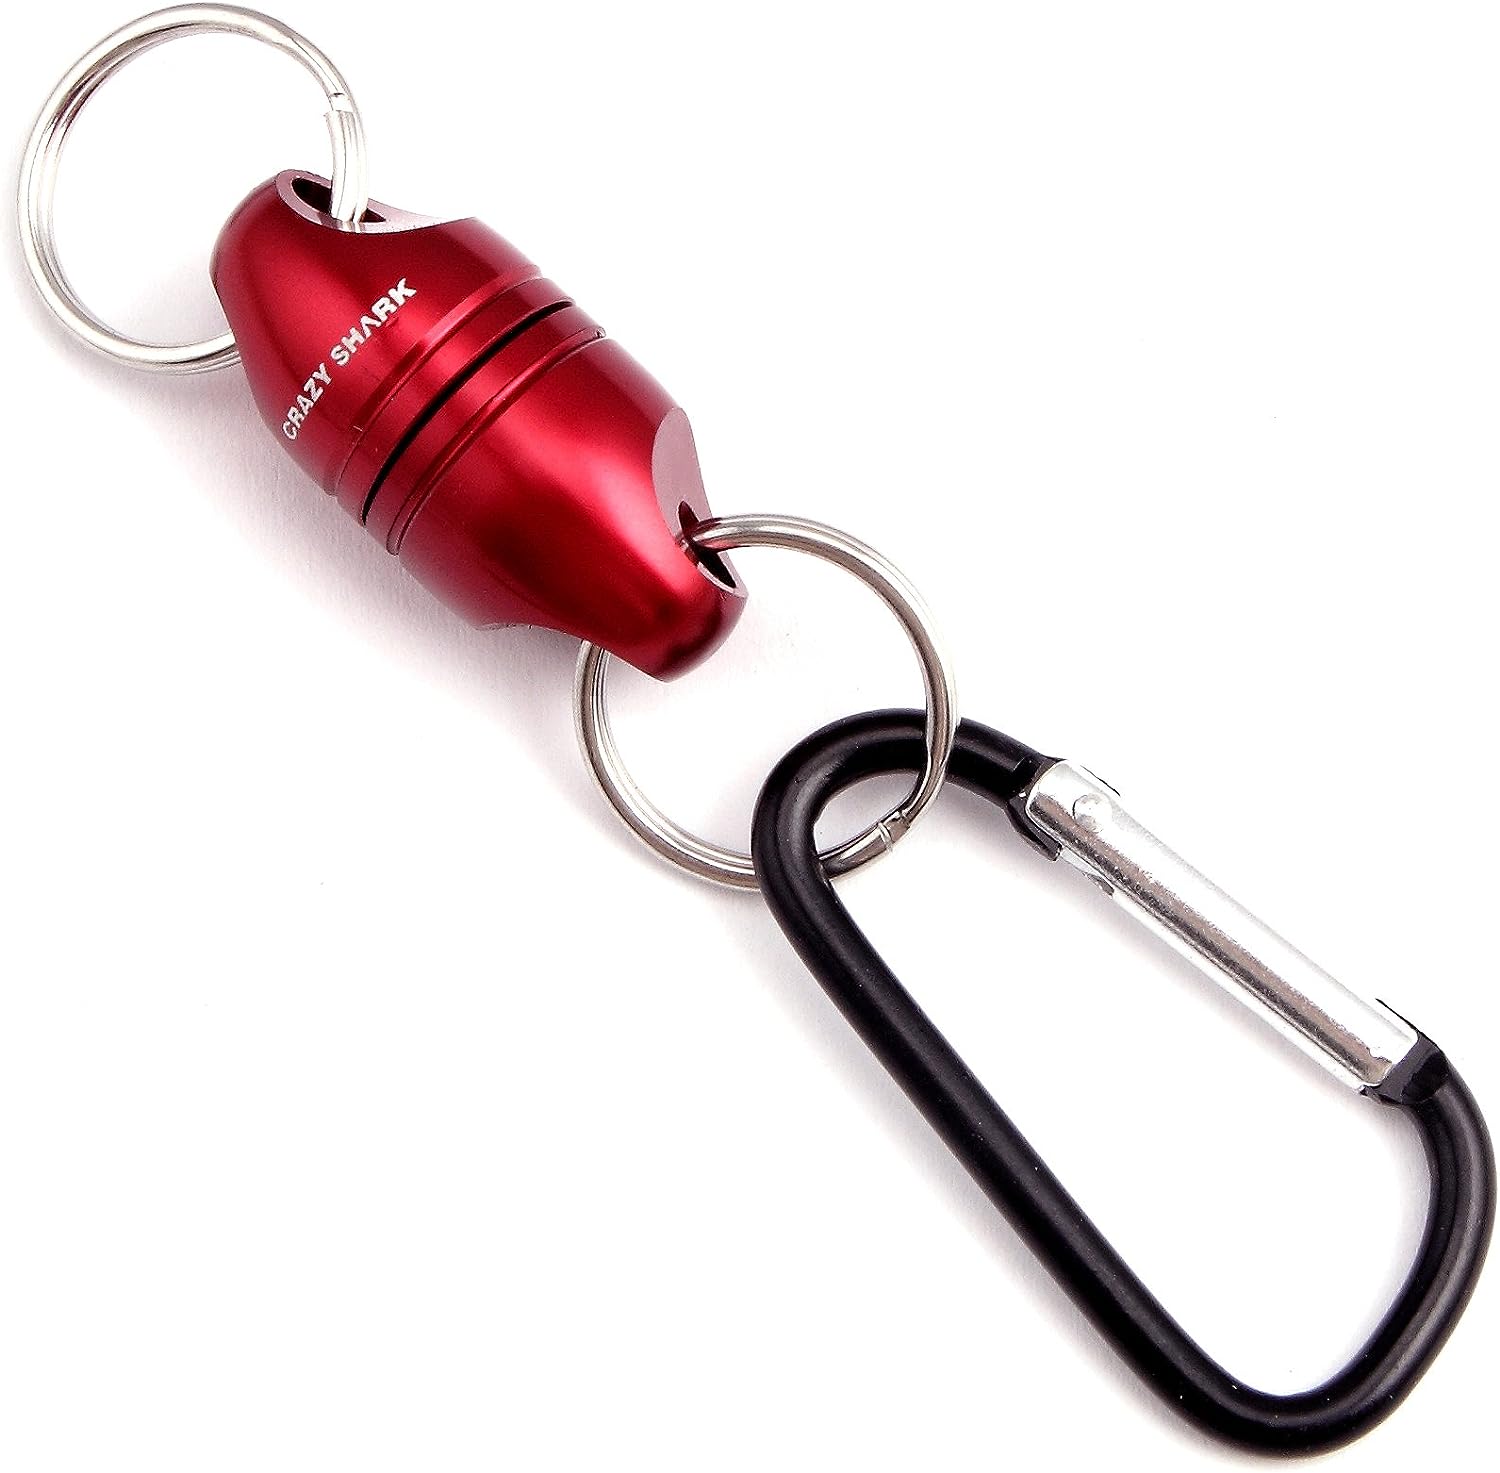 SHARK CRAZY Magnetic Net Release Aluminum Shell Fly Fishing – Fly Fish Flies